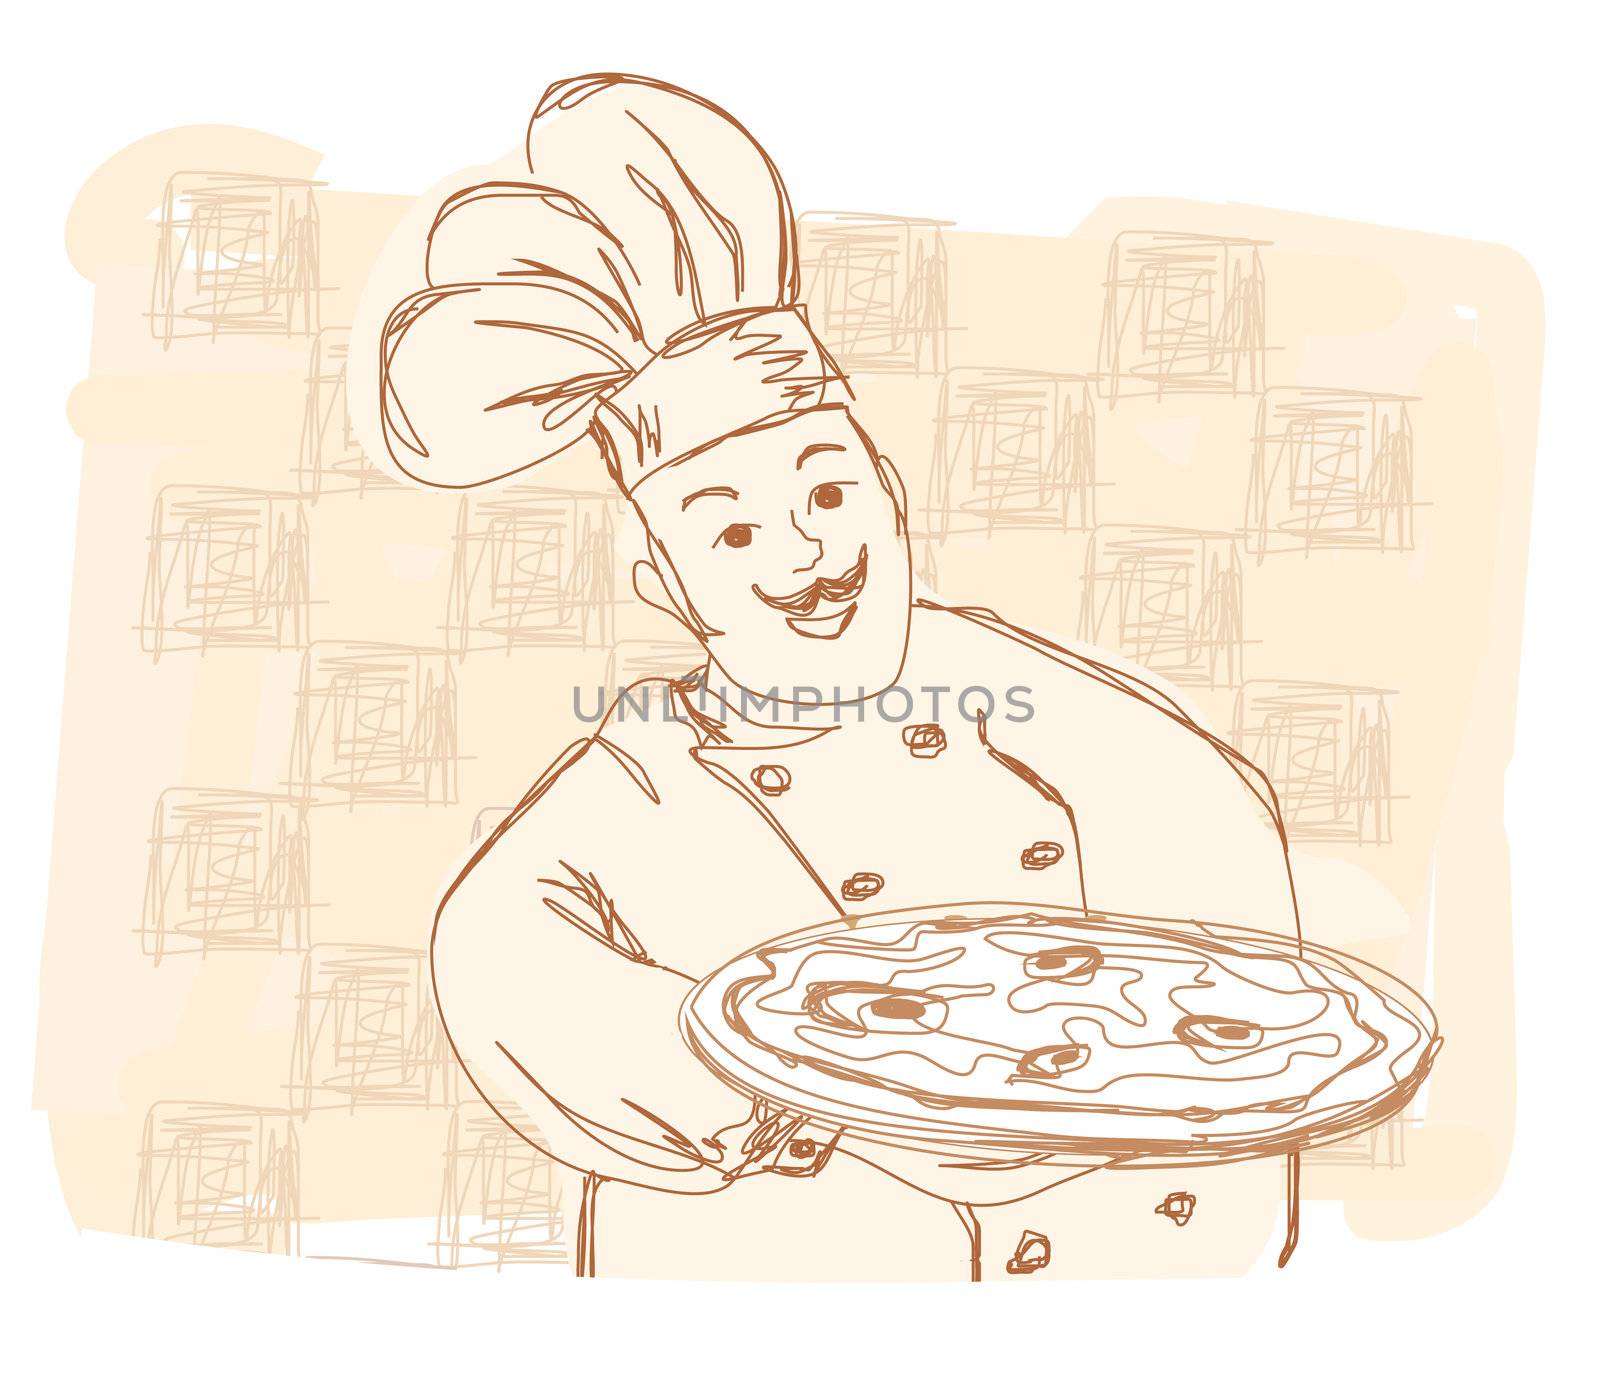 chef with pizza - doodle illustration by JackyBrown